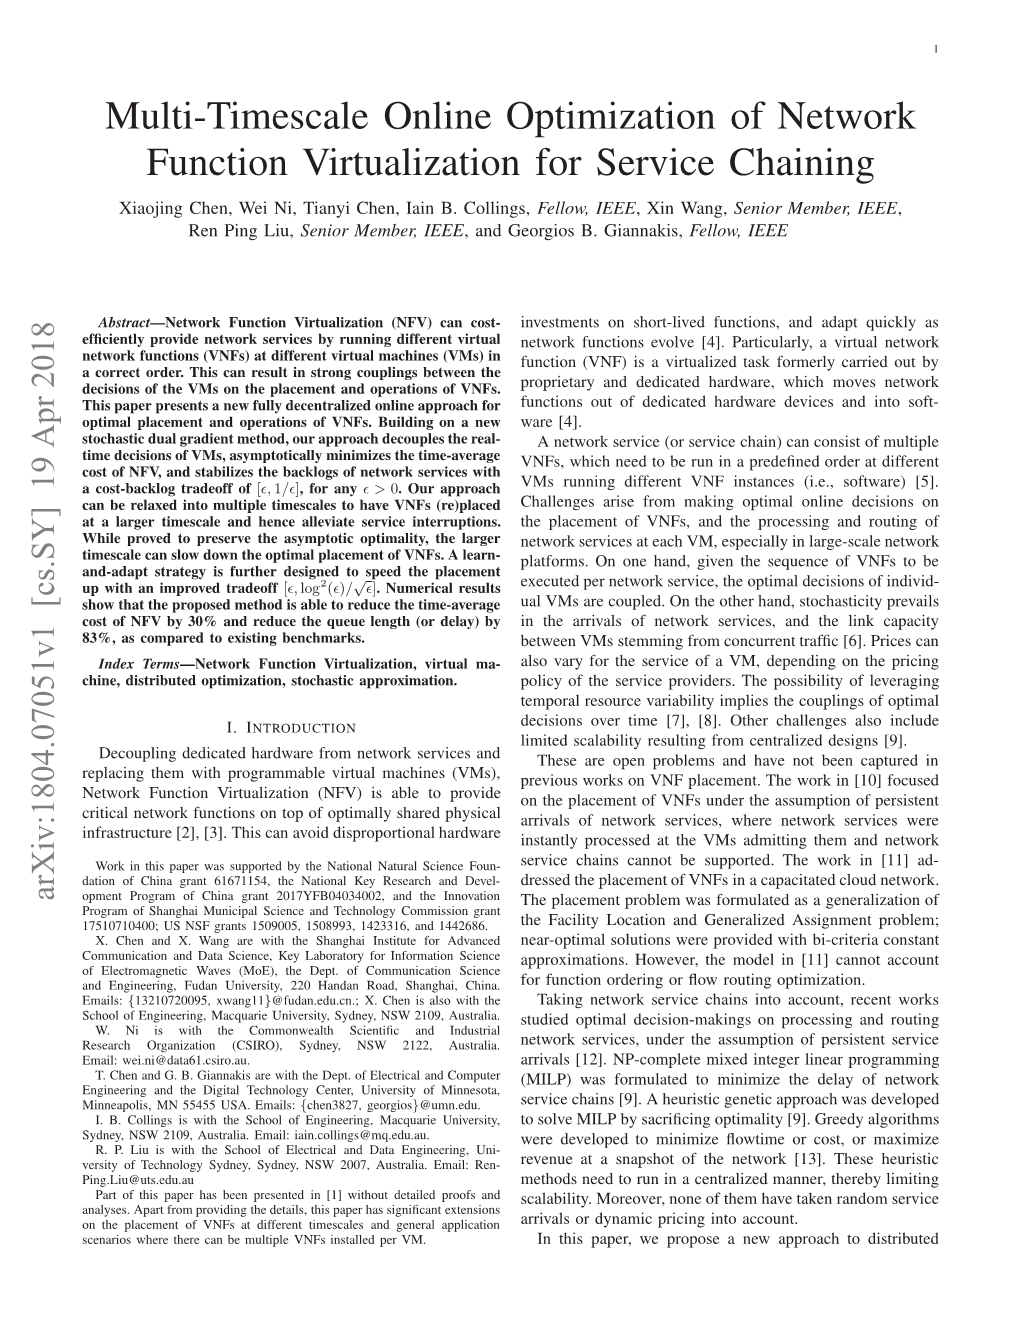 Multi-Timescale Online Optimization of Network Function Virtualization For